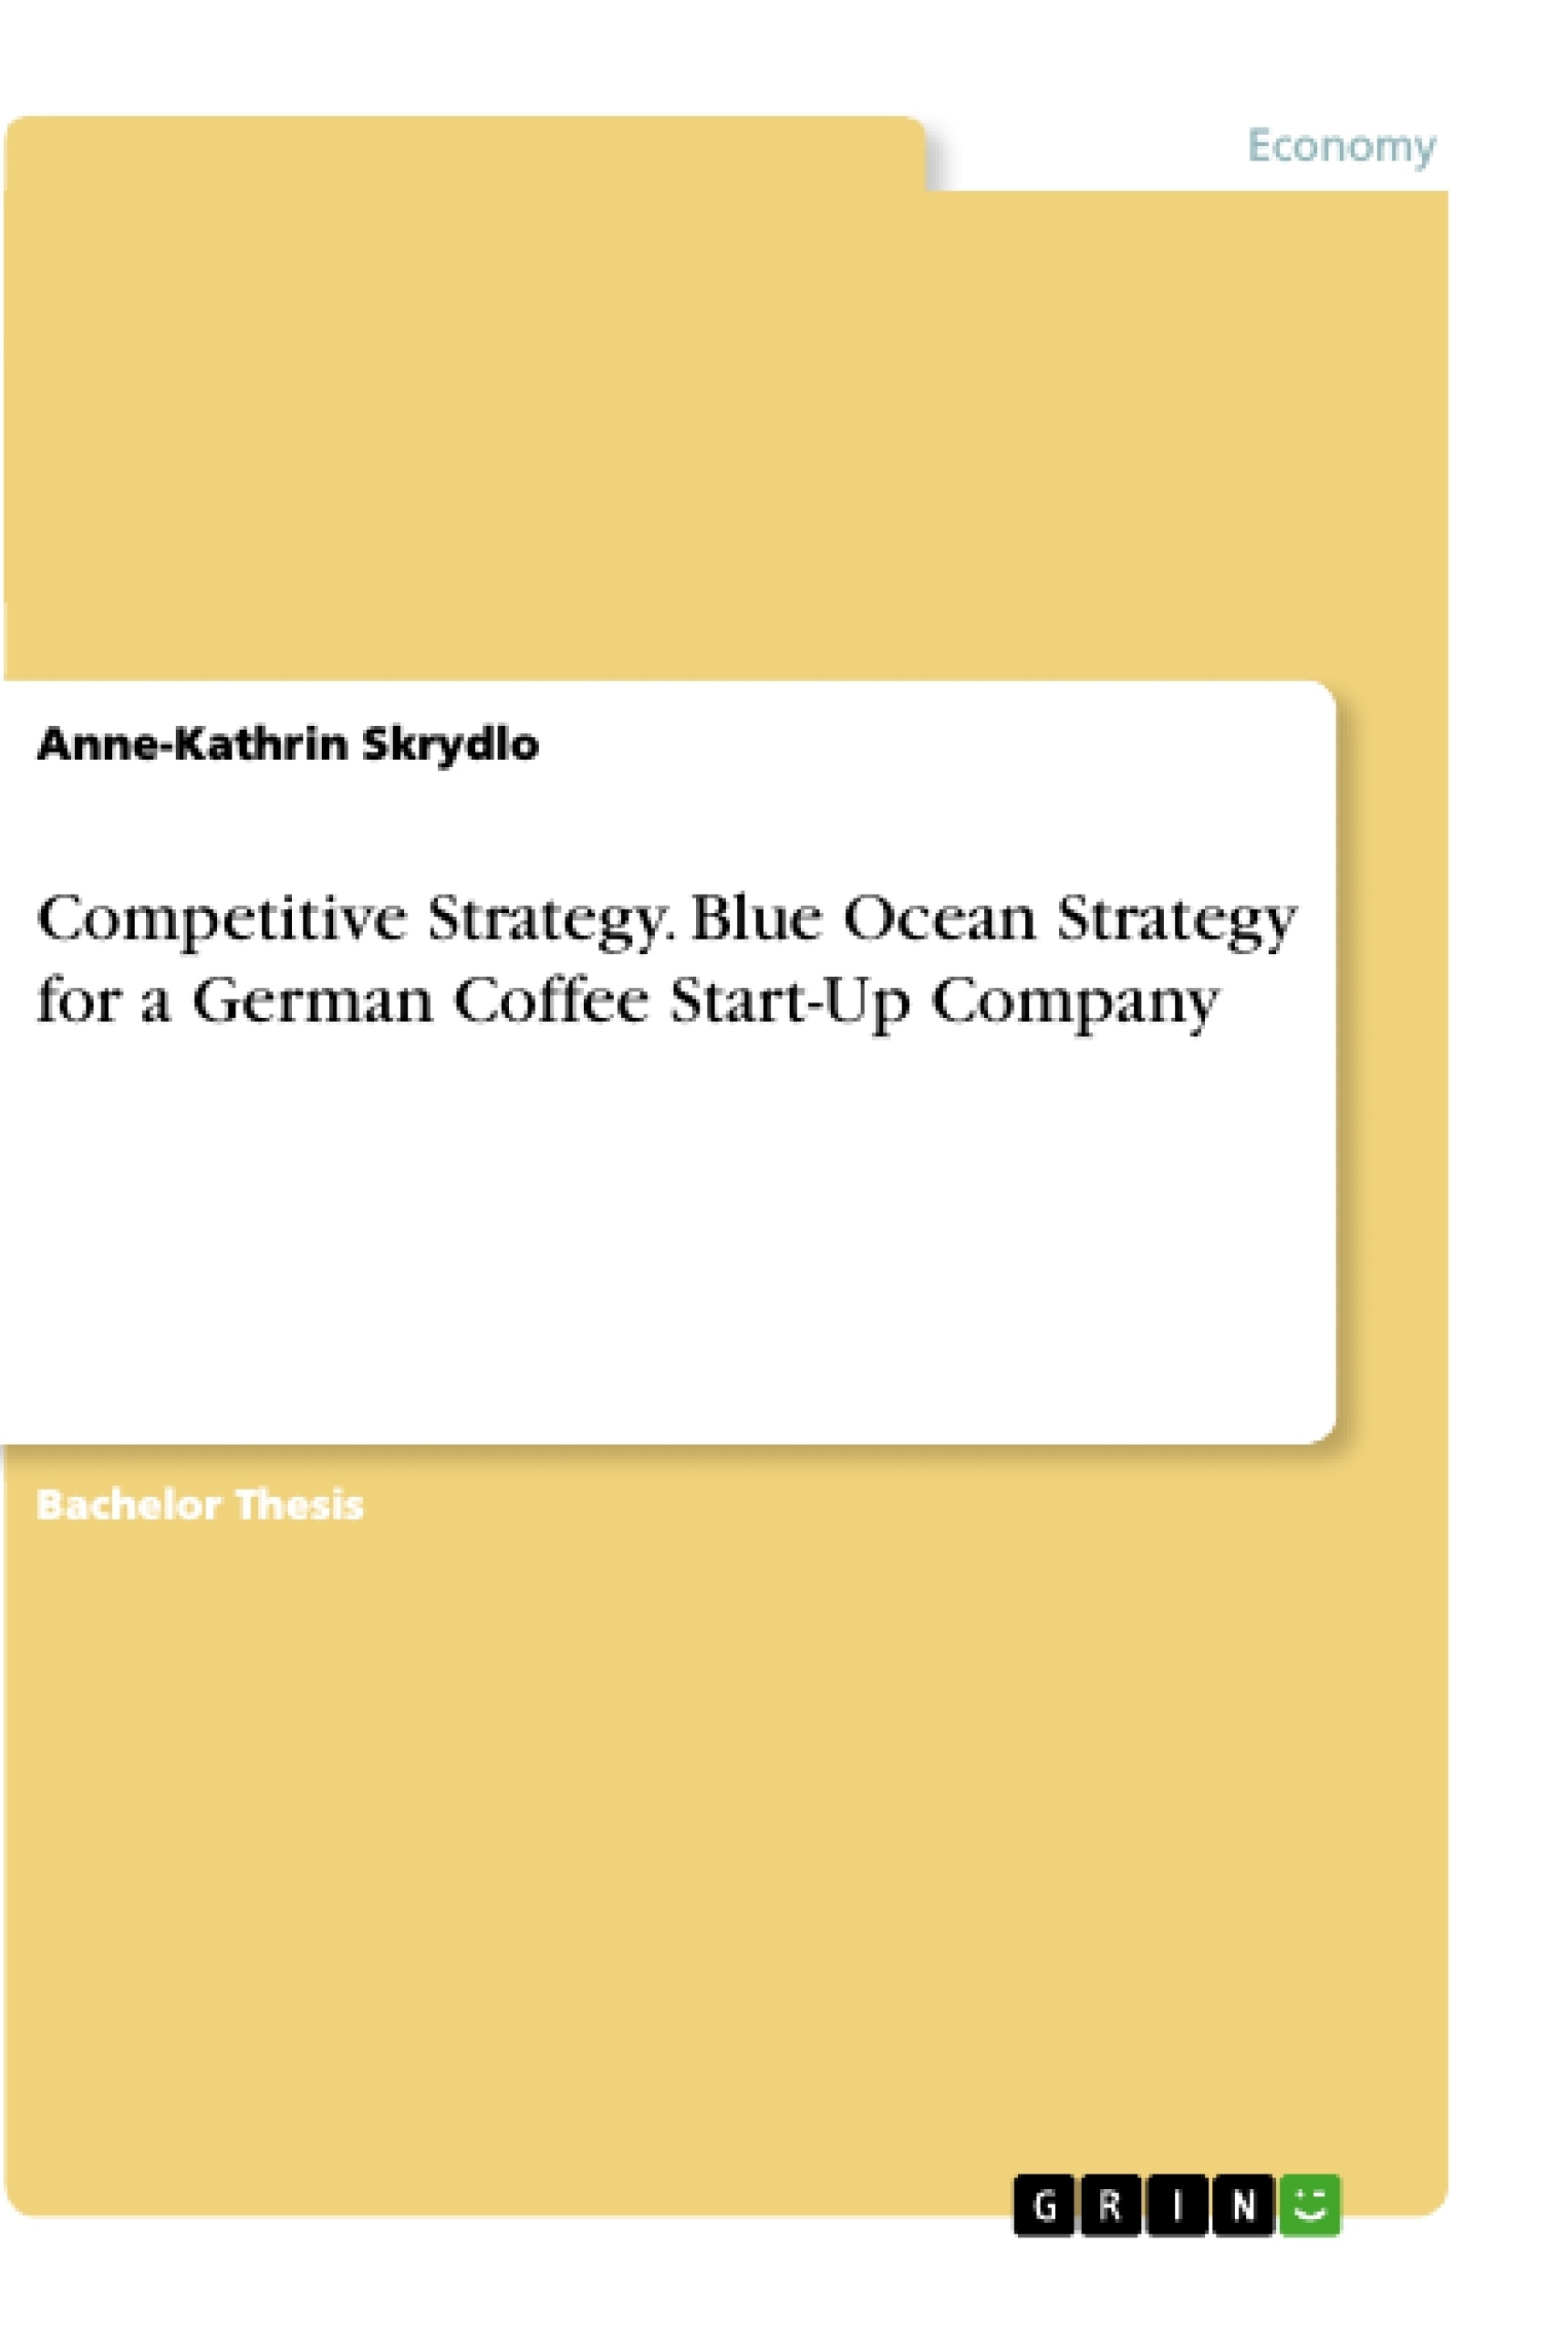 Title: Competitive Strategy. Blue Ocean Strategy for a German Coffee Start-Up Company